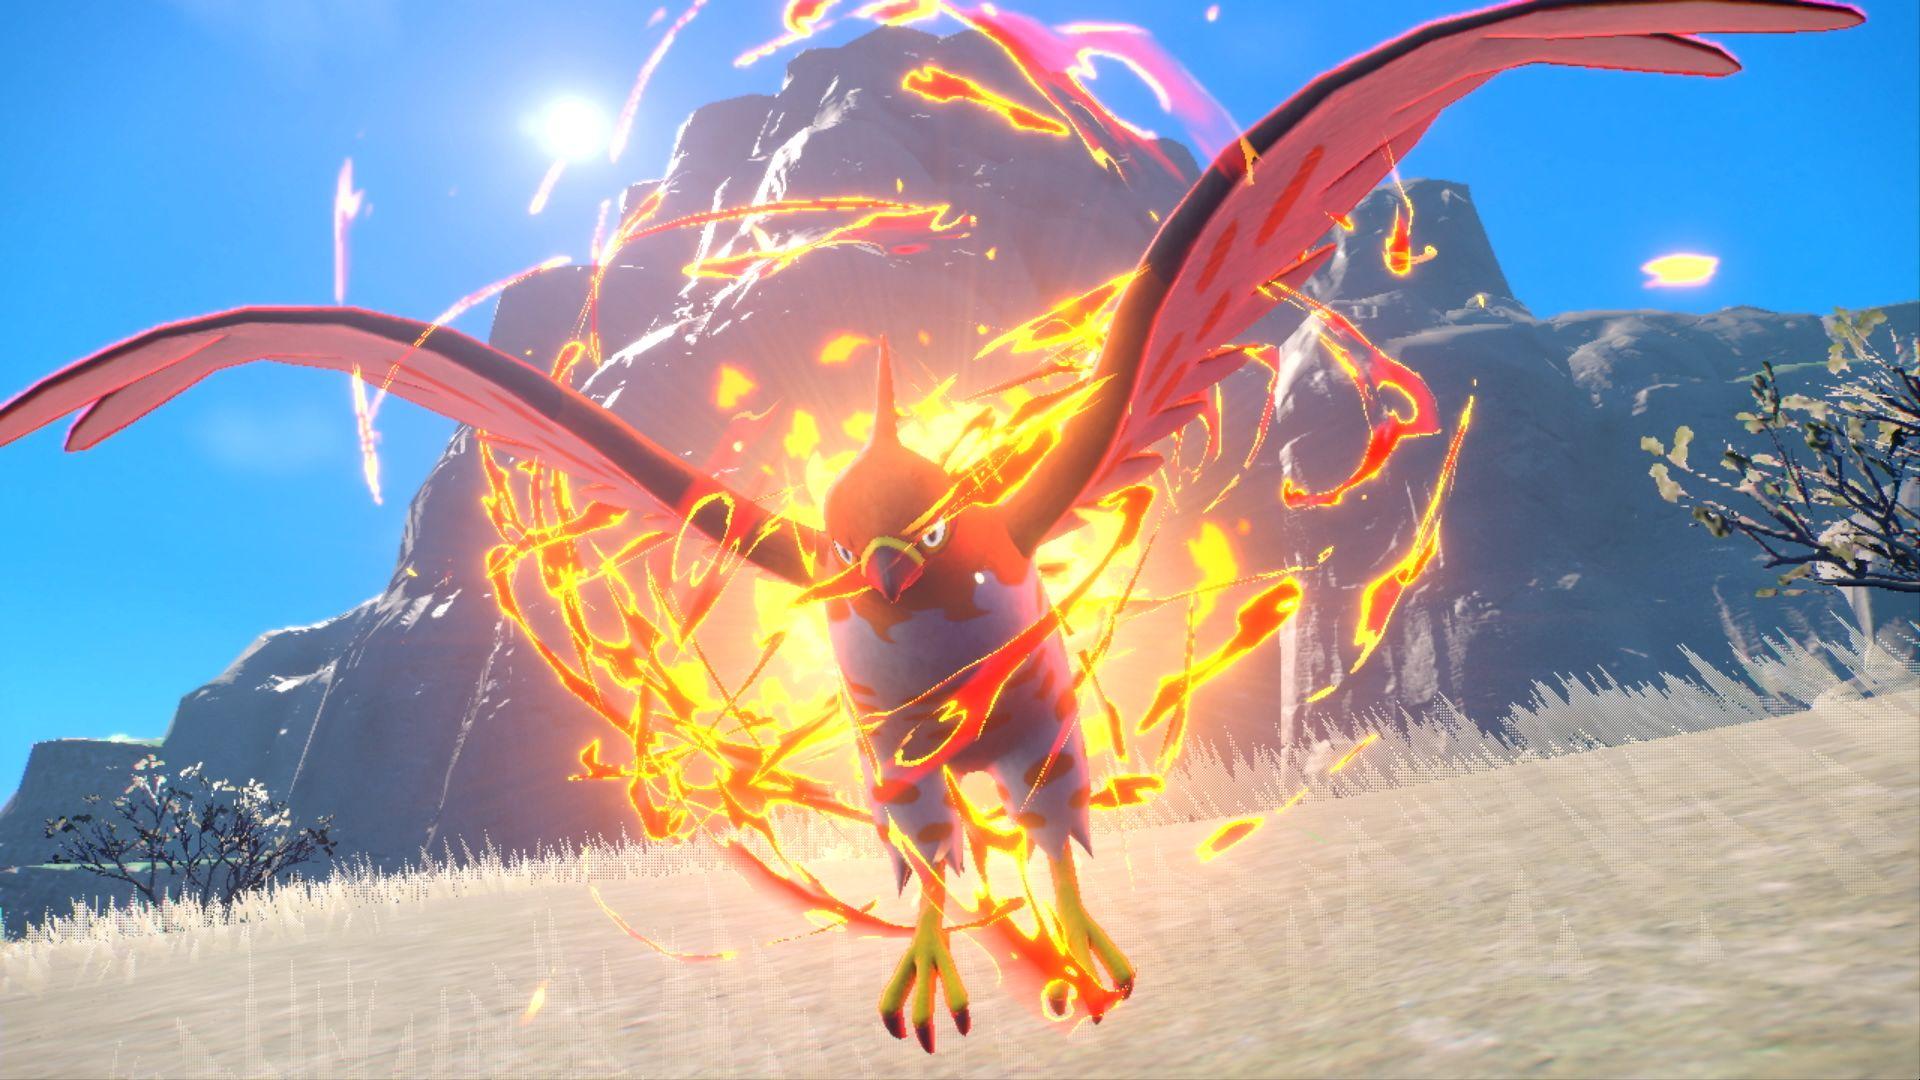 Pokemon Sword And Shield: All Version Exclusives, Version